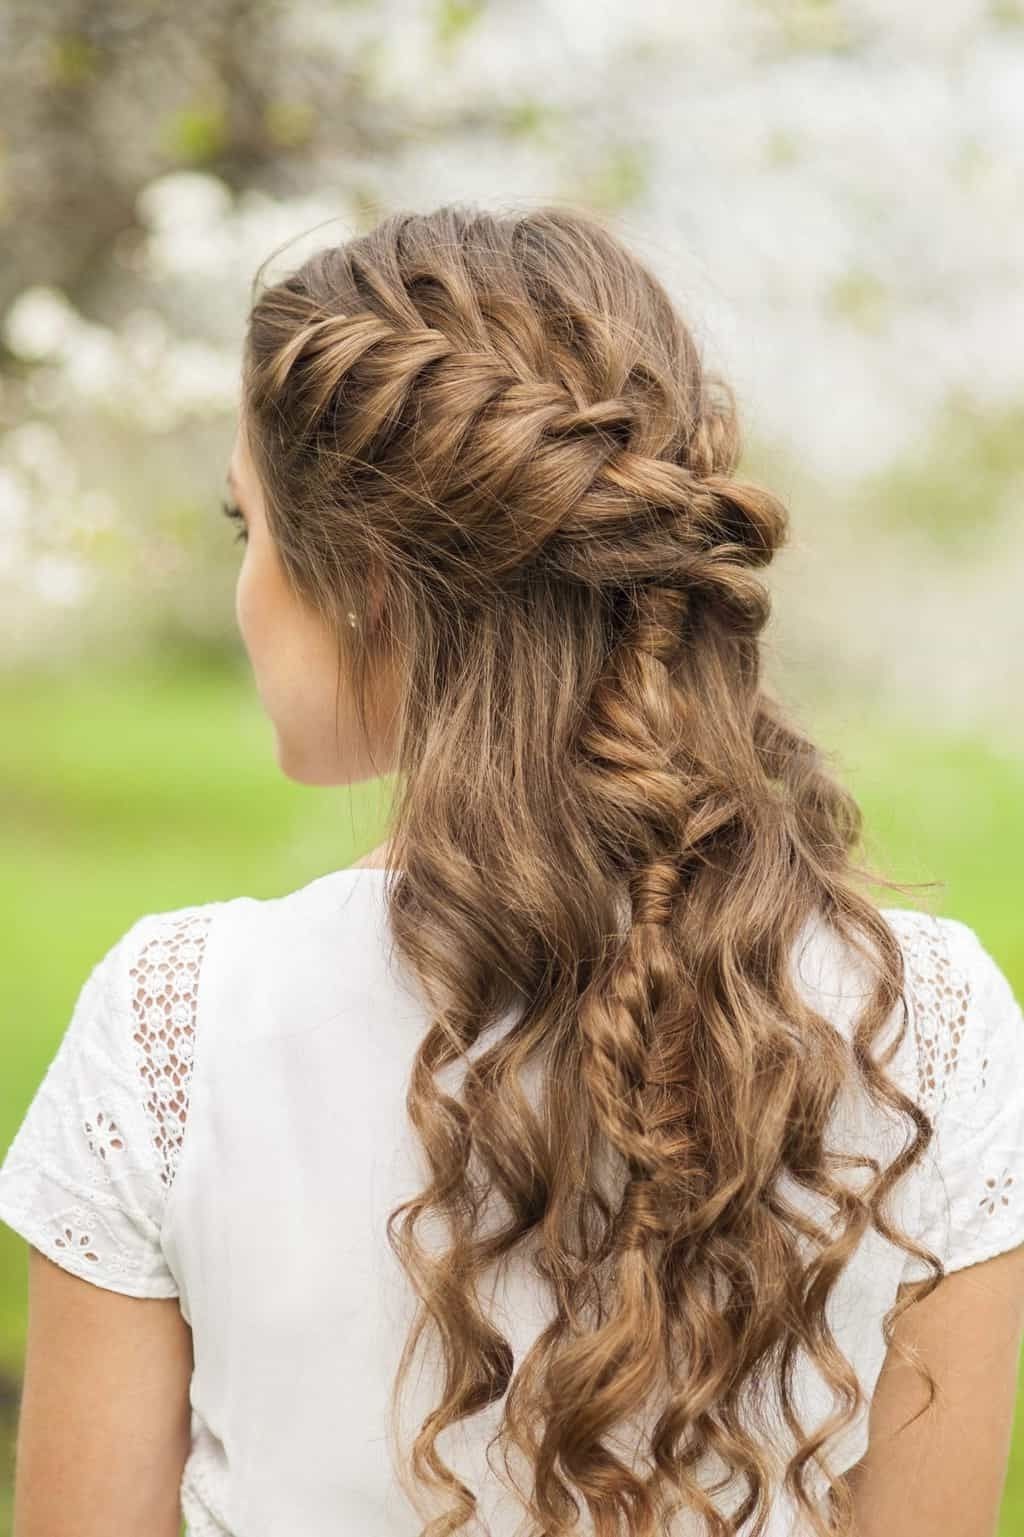 10 Elegant French Braids To Wear With Curly Hair Throughout Most Up To Date Braids With Curls Hairstyles (View 15 of 20)